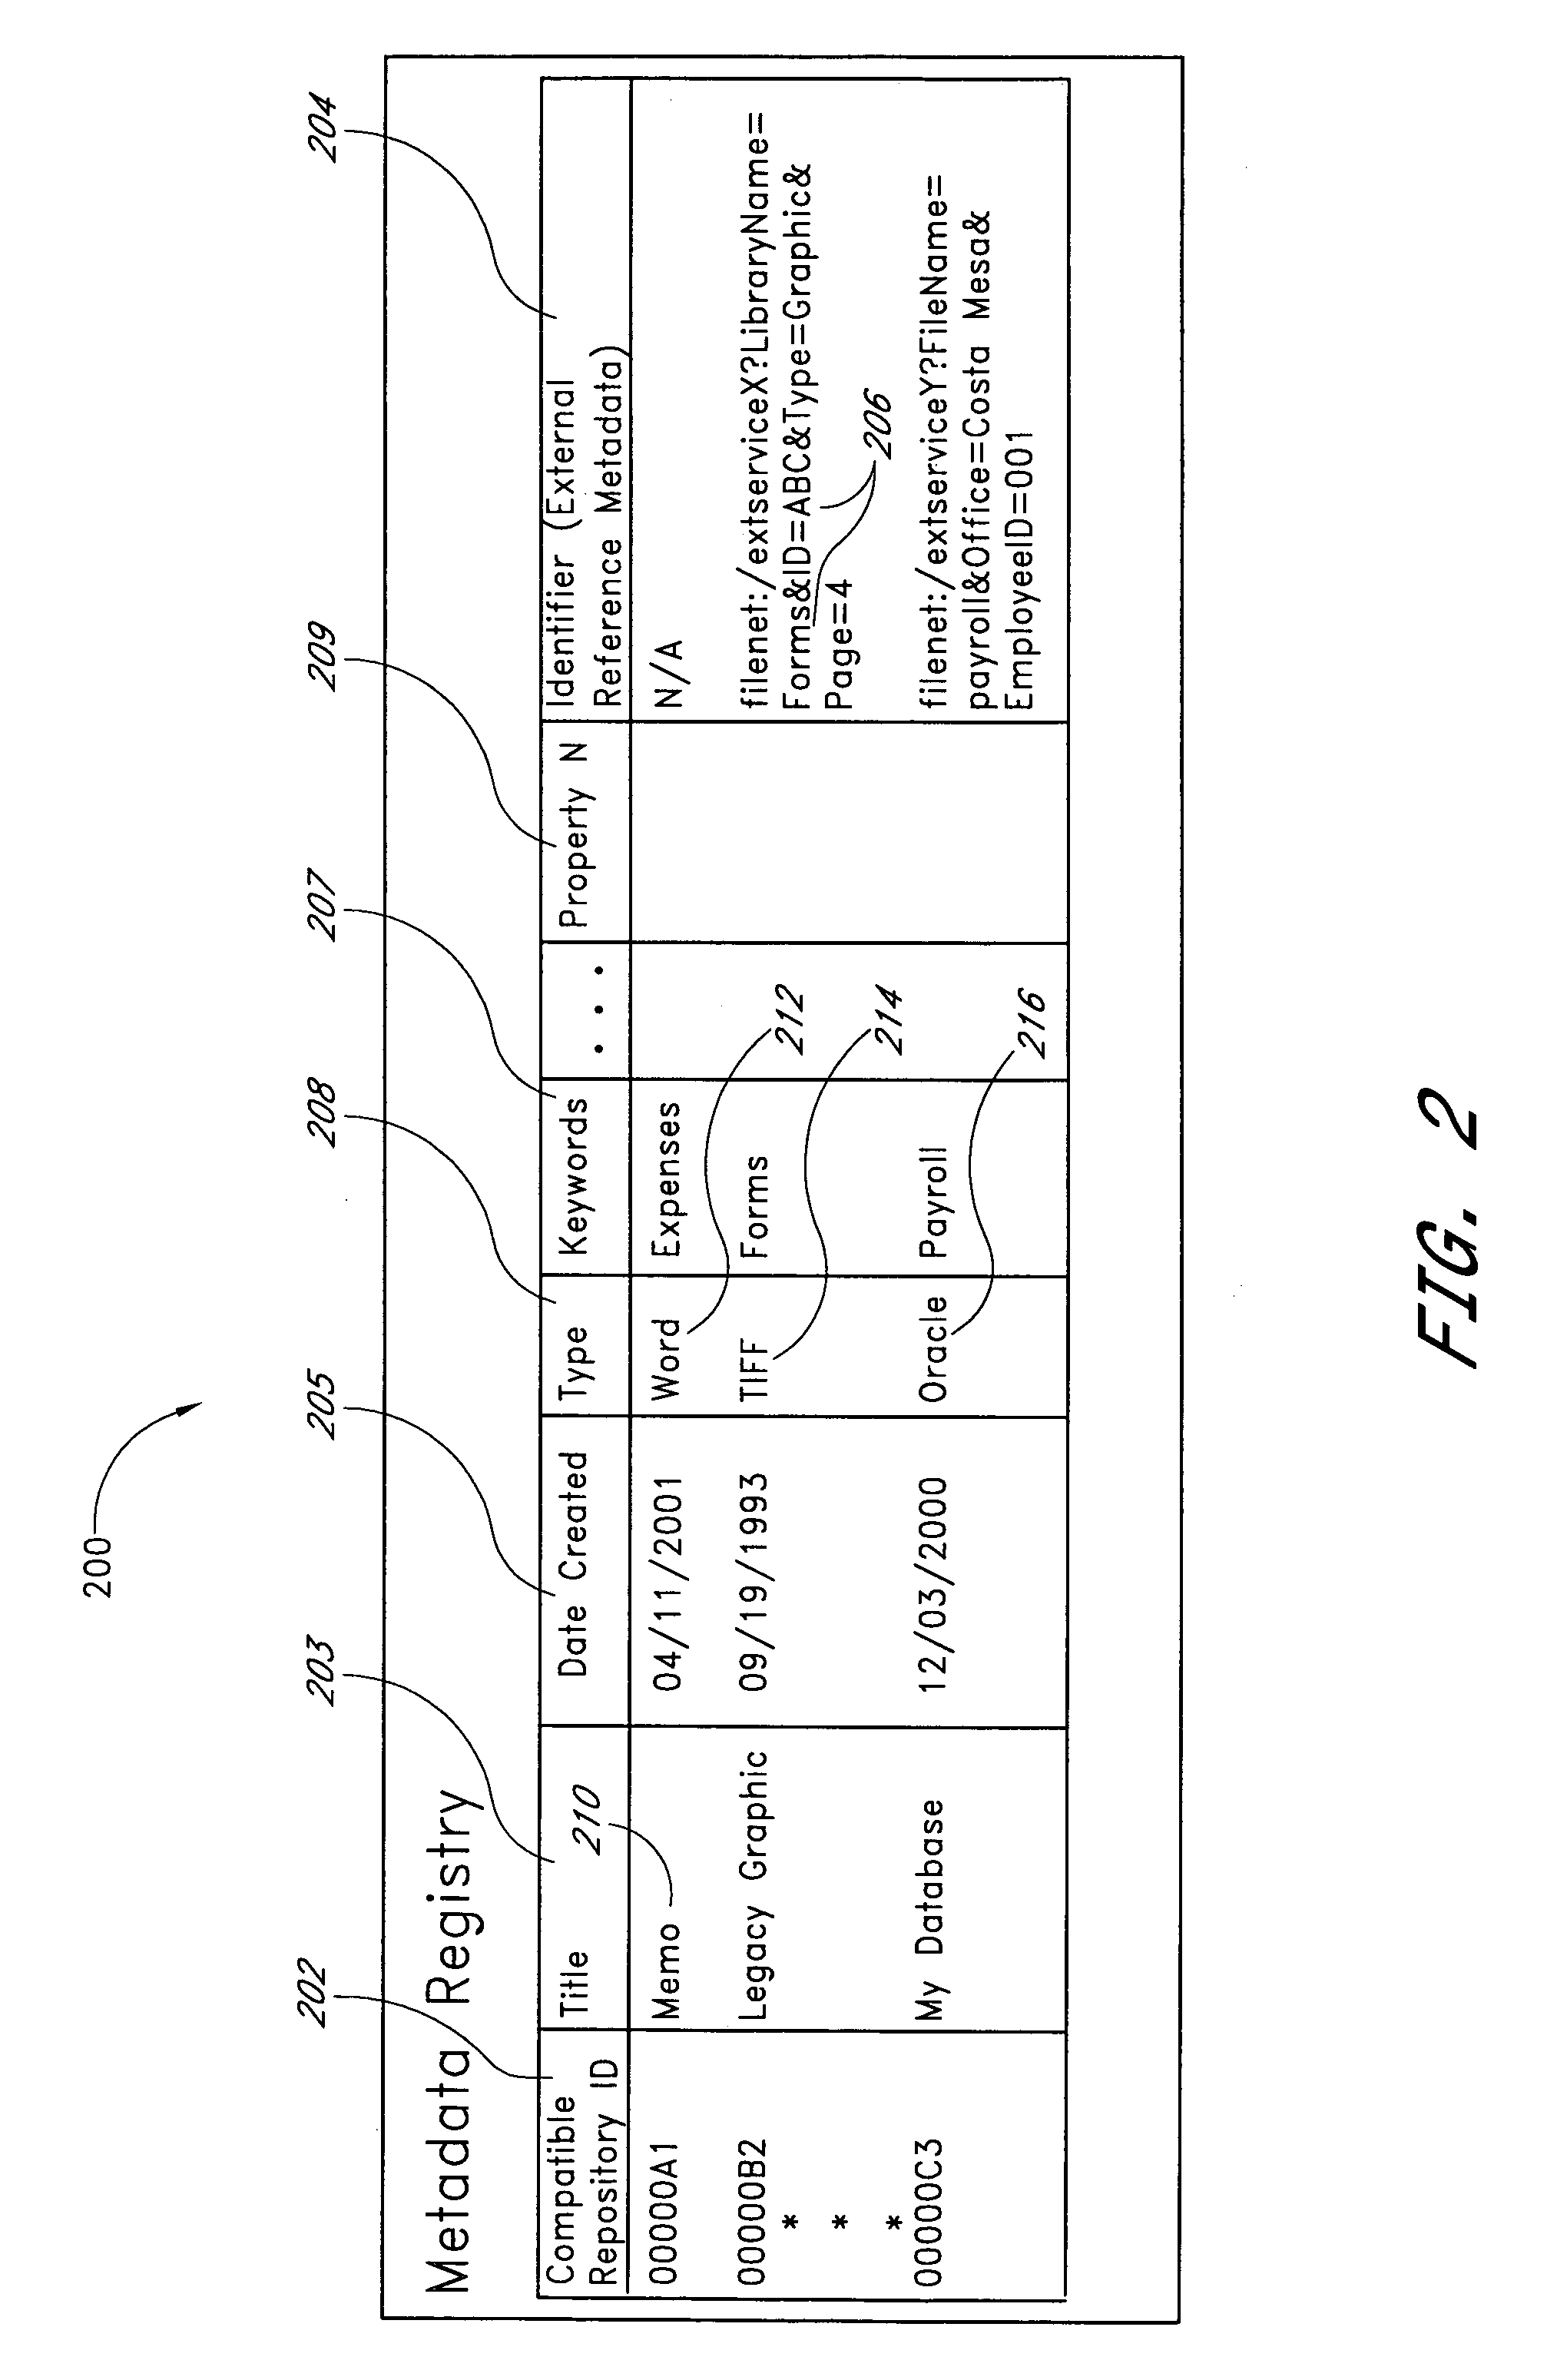 System and method for accessing non-compatible content repositories